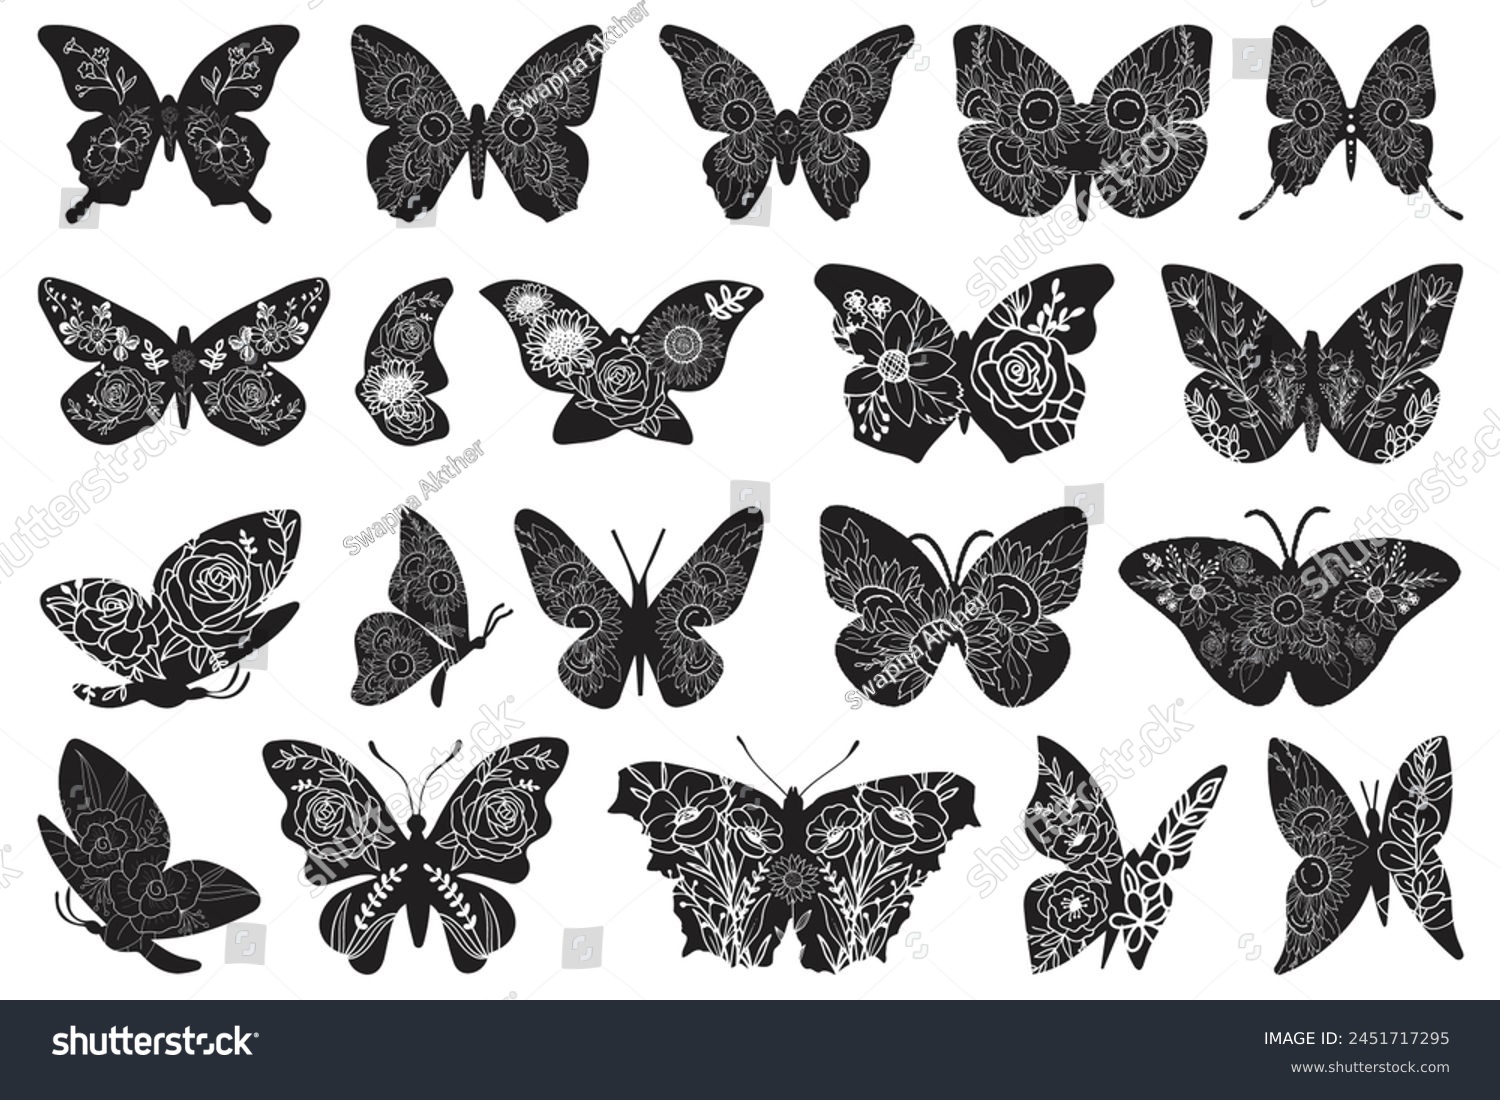 SVG of Flowers and butterfly design Bundle.. Floral butterfly silhouette set Bundle. Vector monochrome illustration isolated on a white background. Various moths with flower wings Bundle. svg